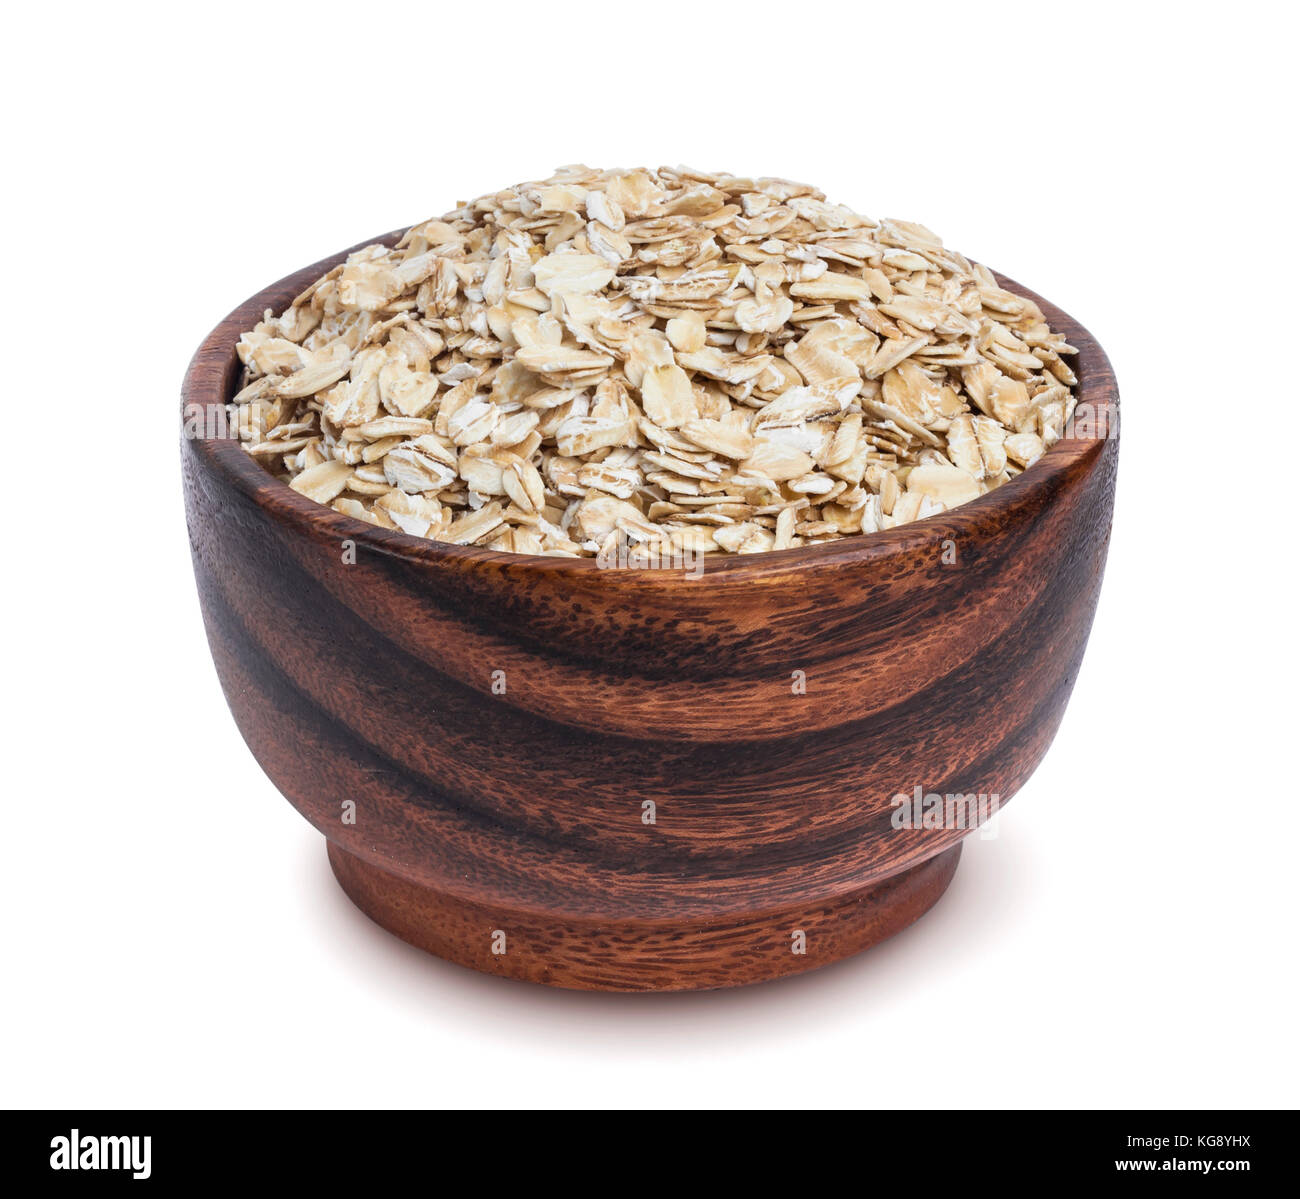 Isolated oatmeal. Oat flakes in wooden bowl on white background Stock Photo